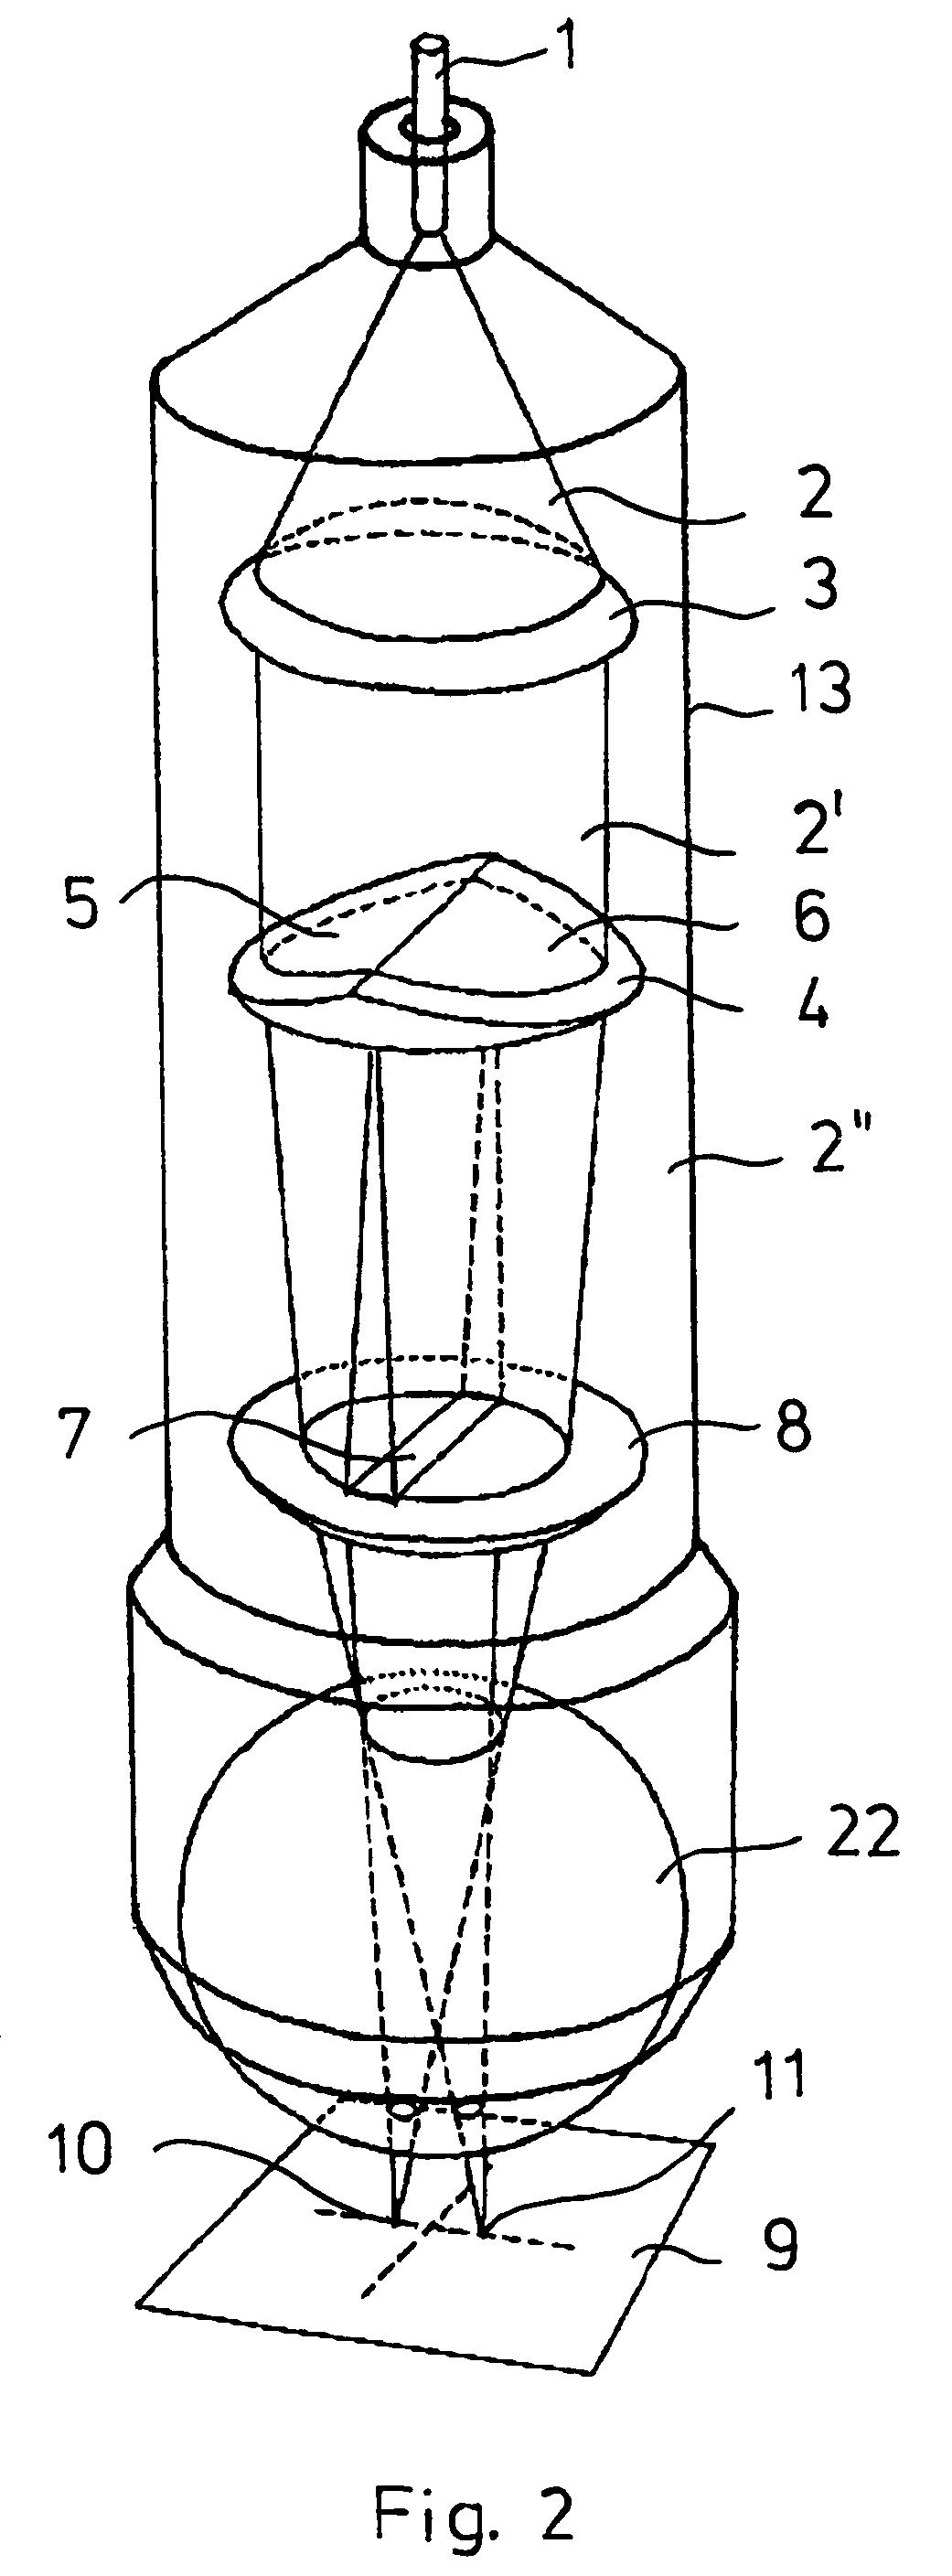 Method and apparatus for heating plastics by means of laser beams